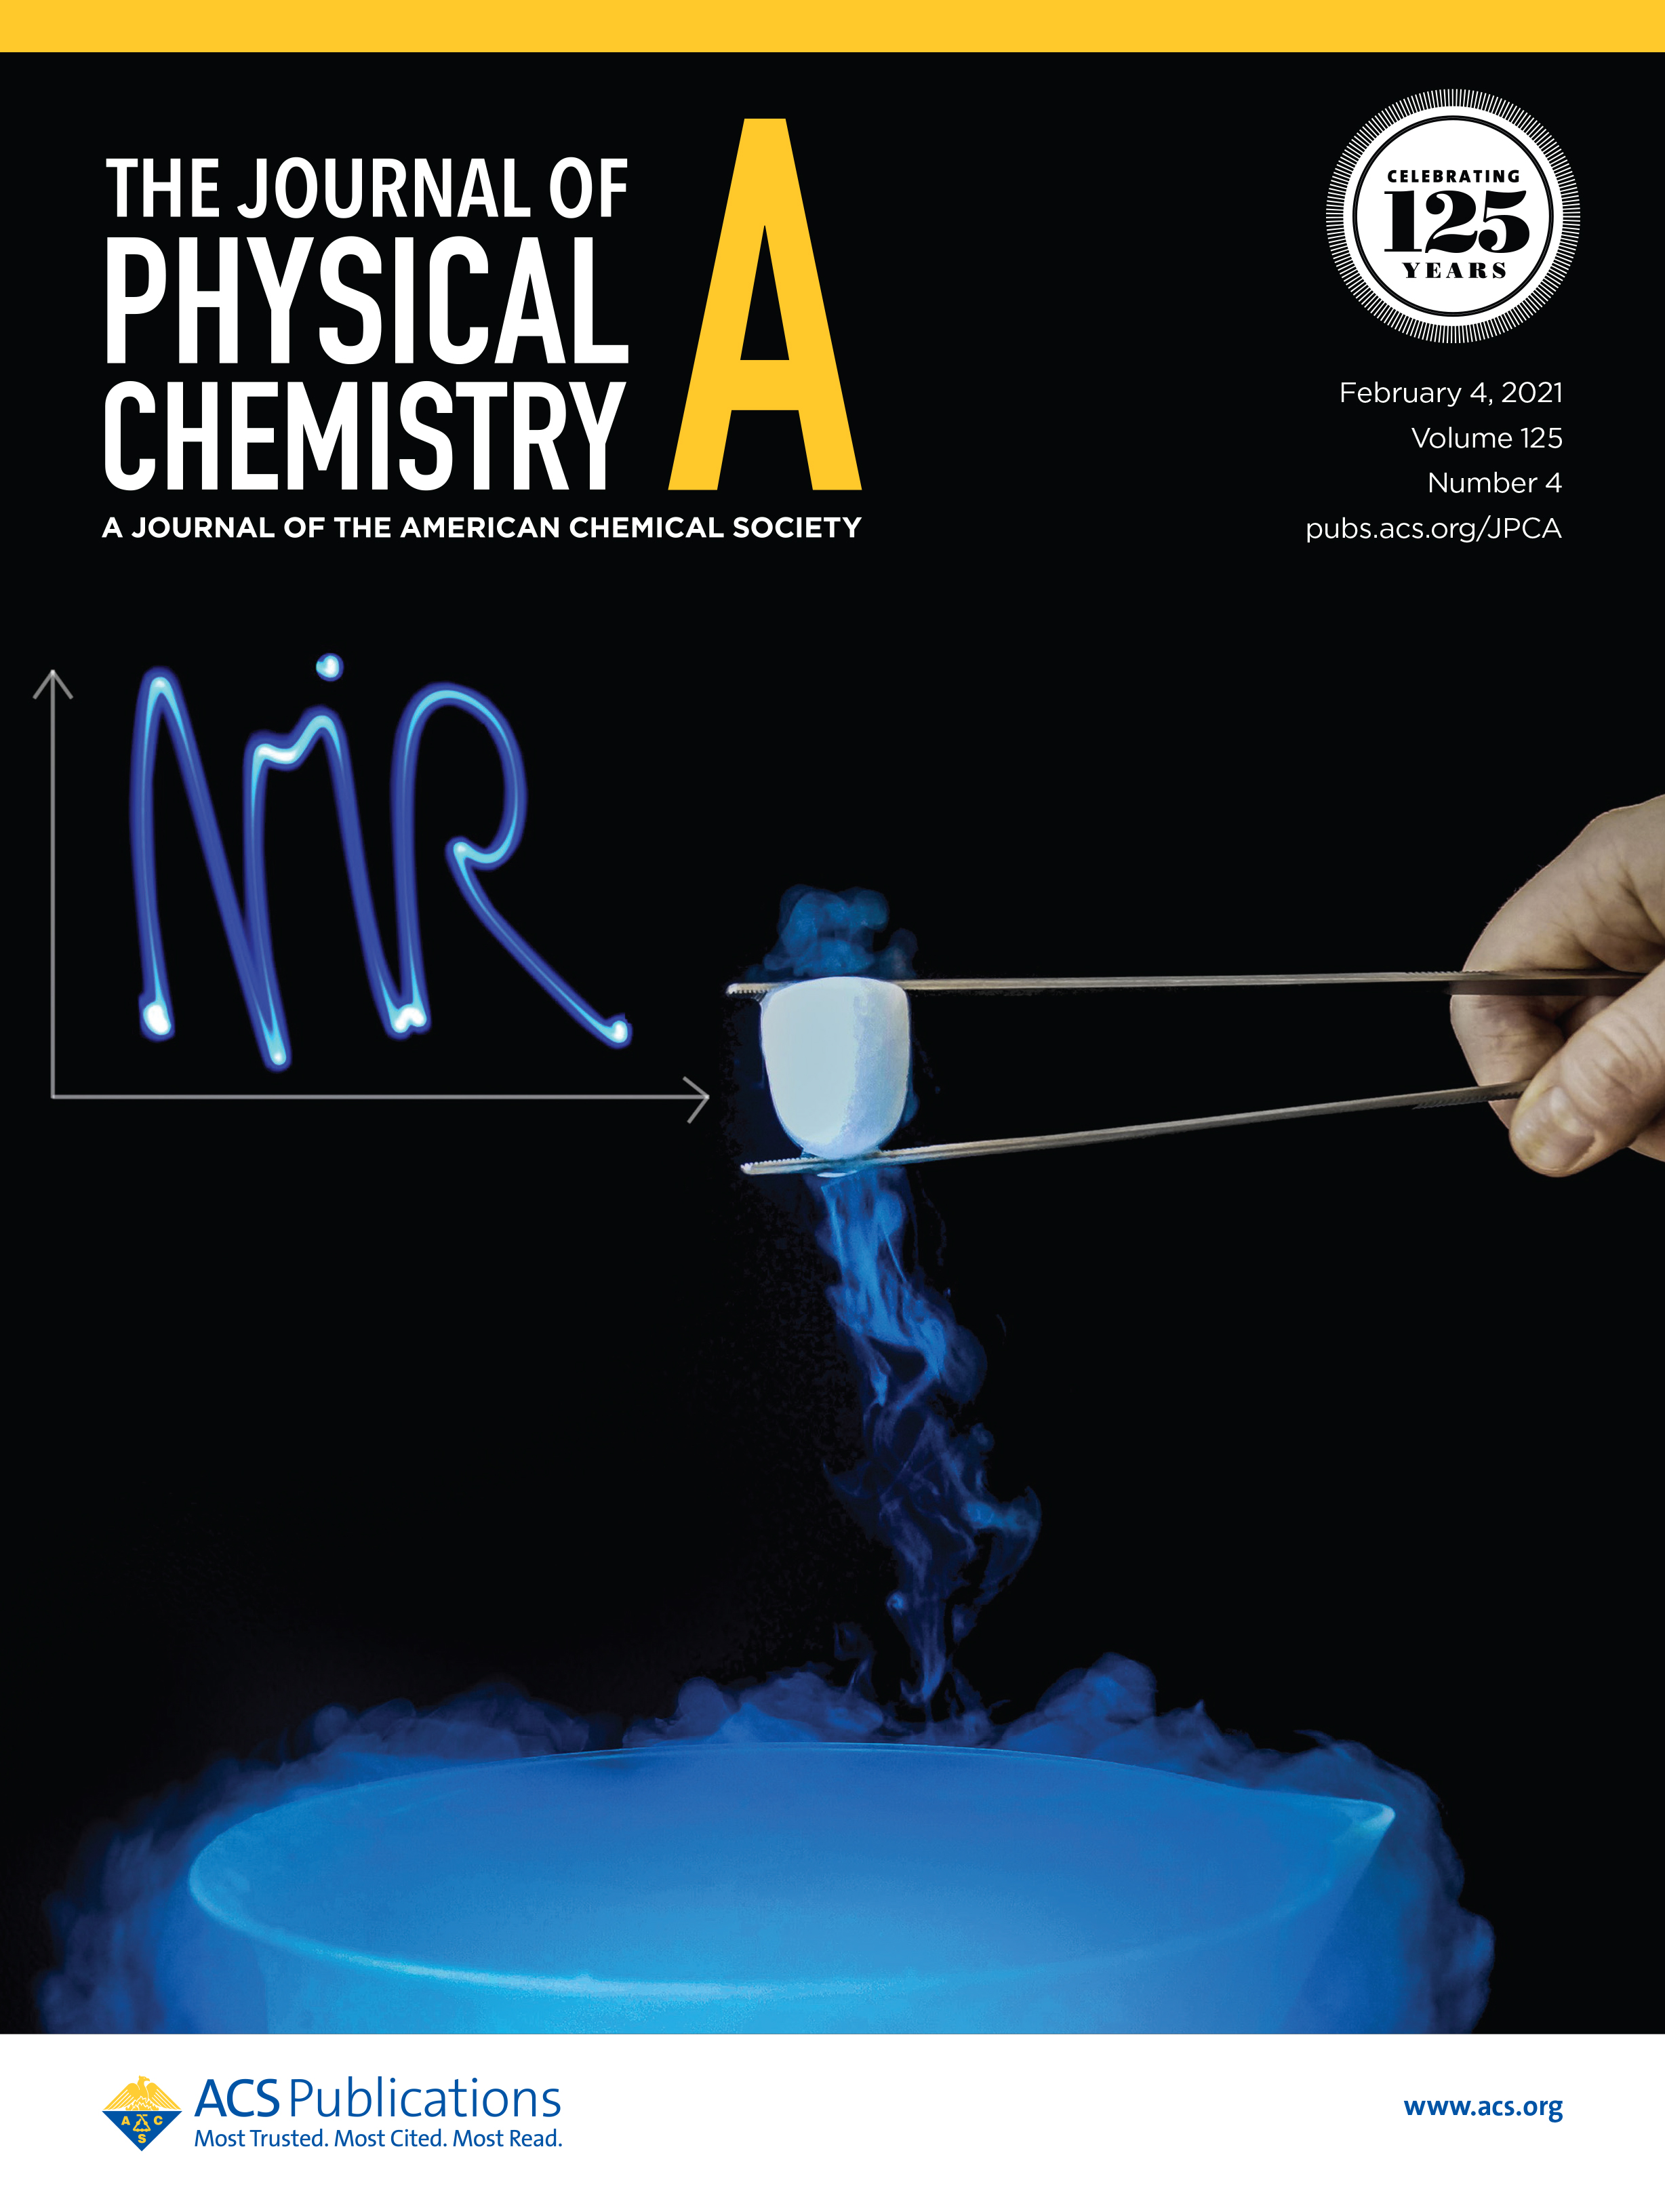 Cover J. Phys. Chem. A 125 (2021) Issue 4